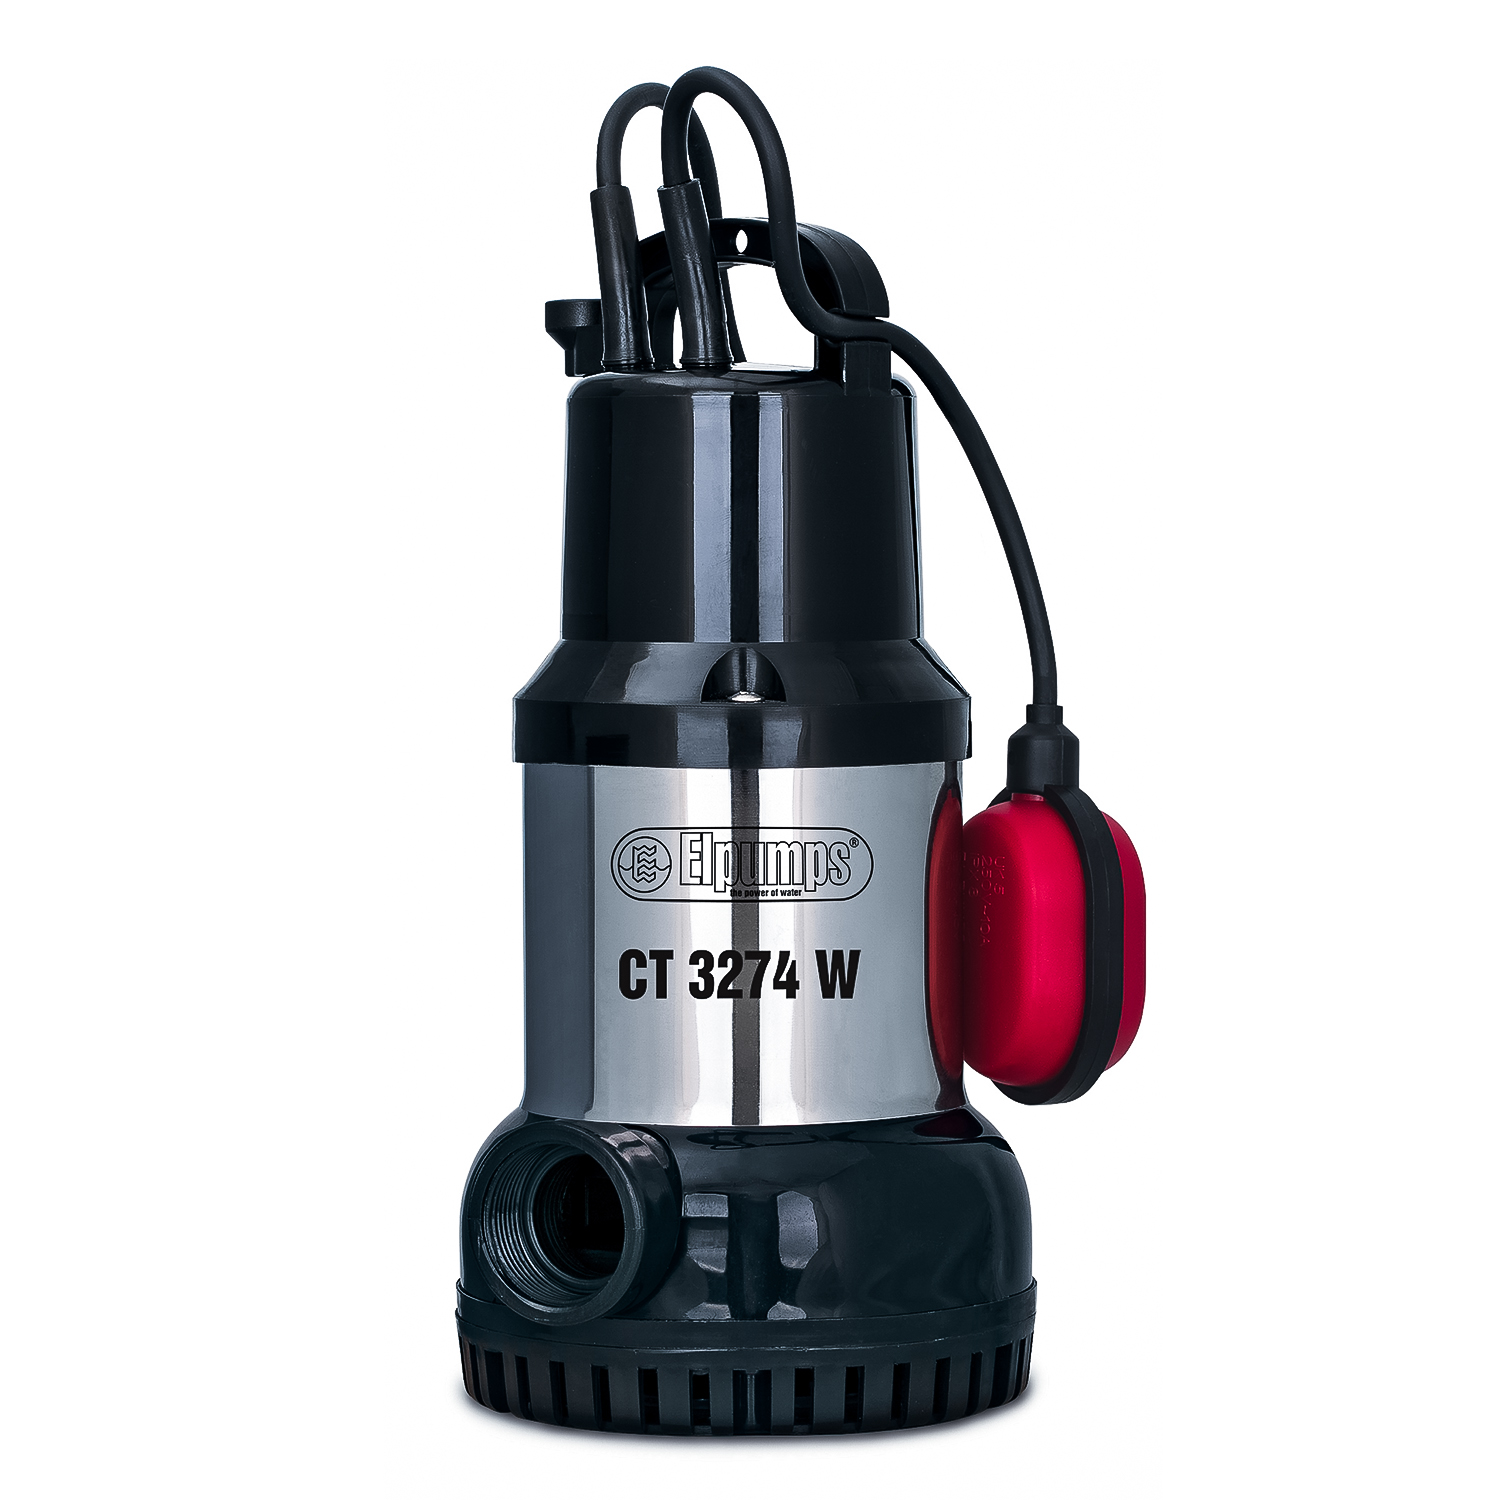 CT 3274 W Submersible pumps for clean and dirty water